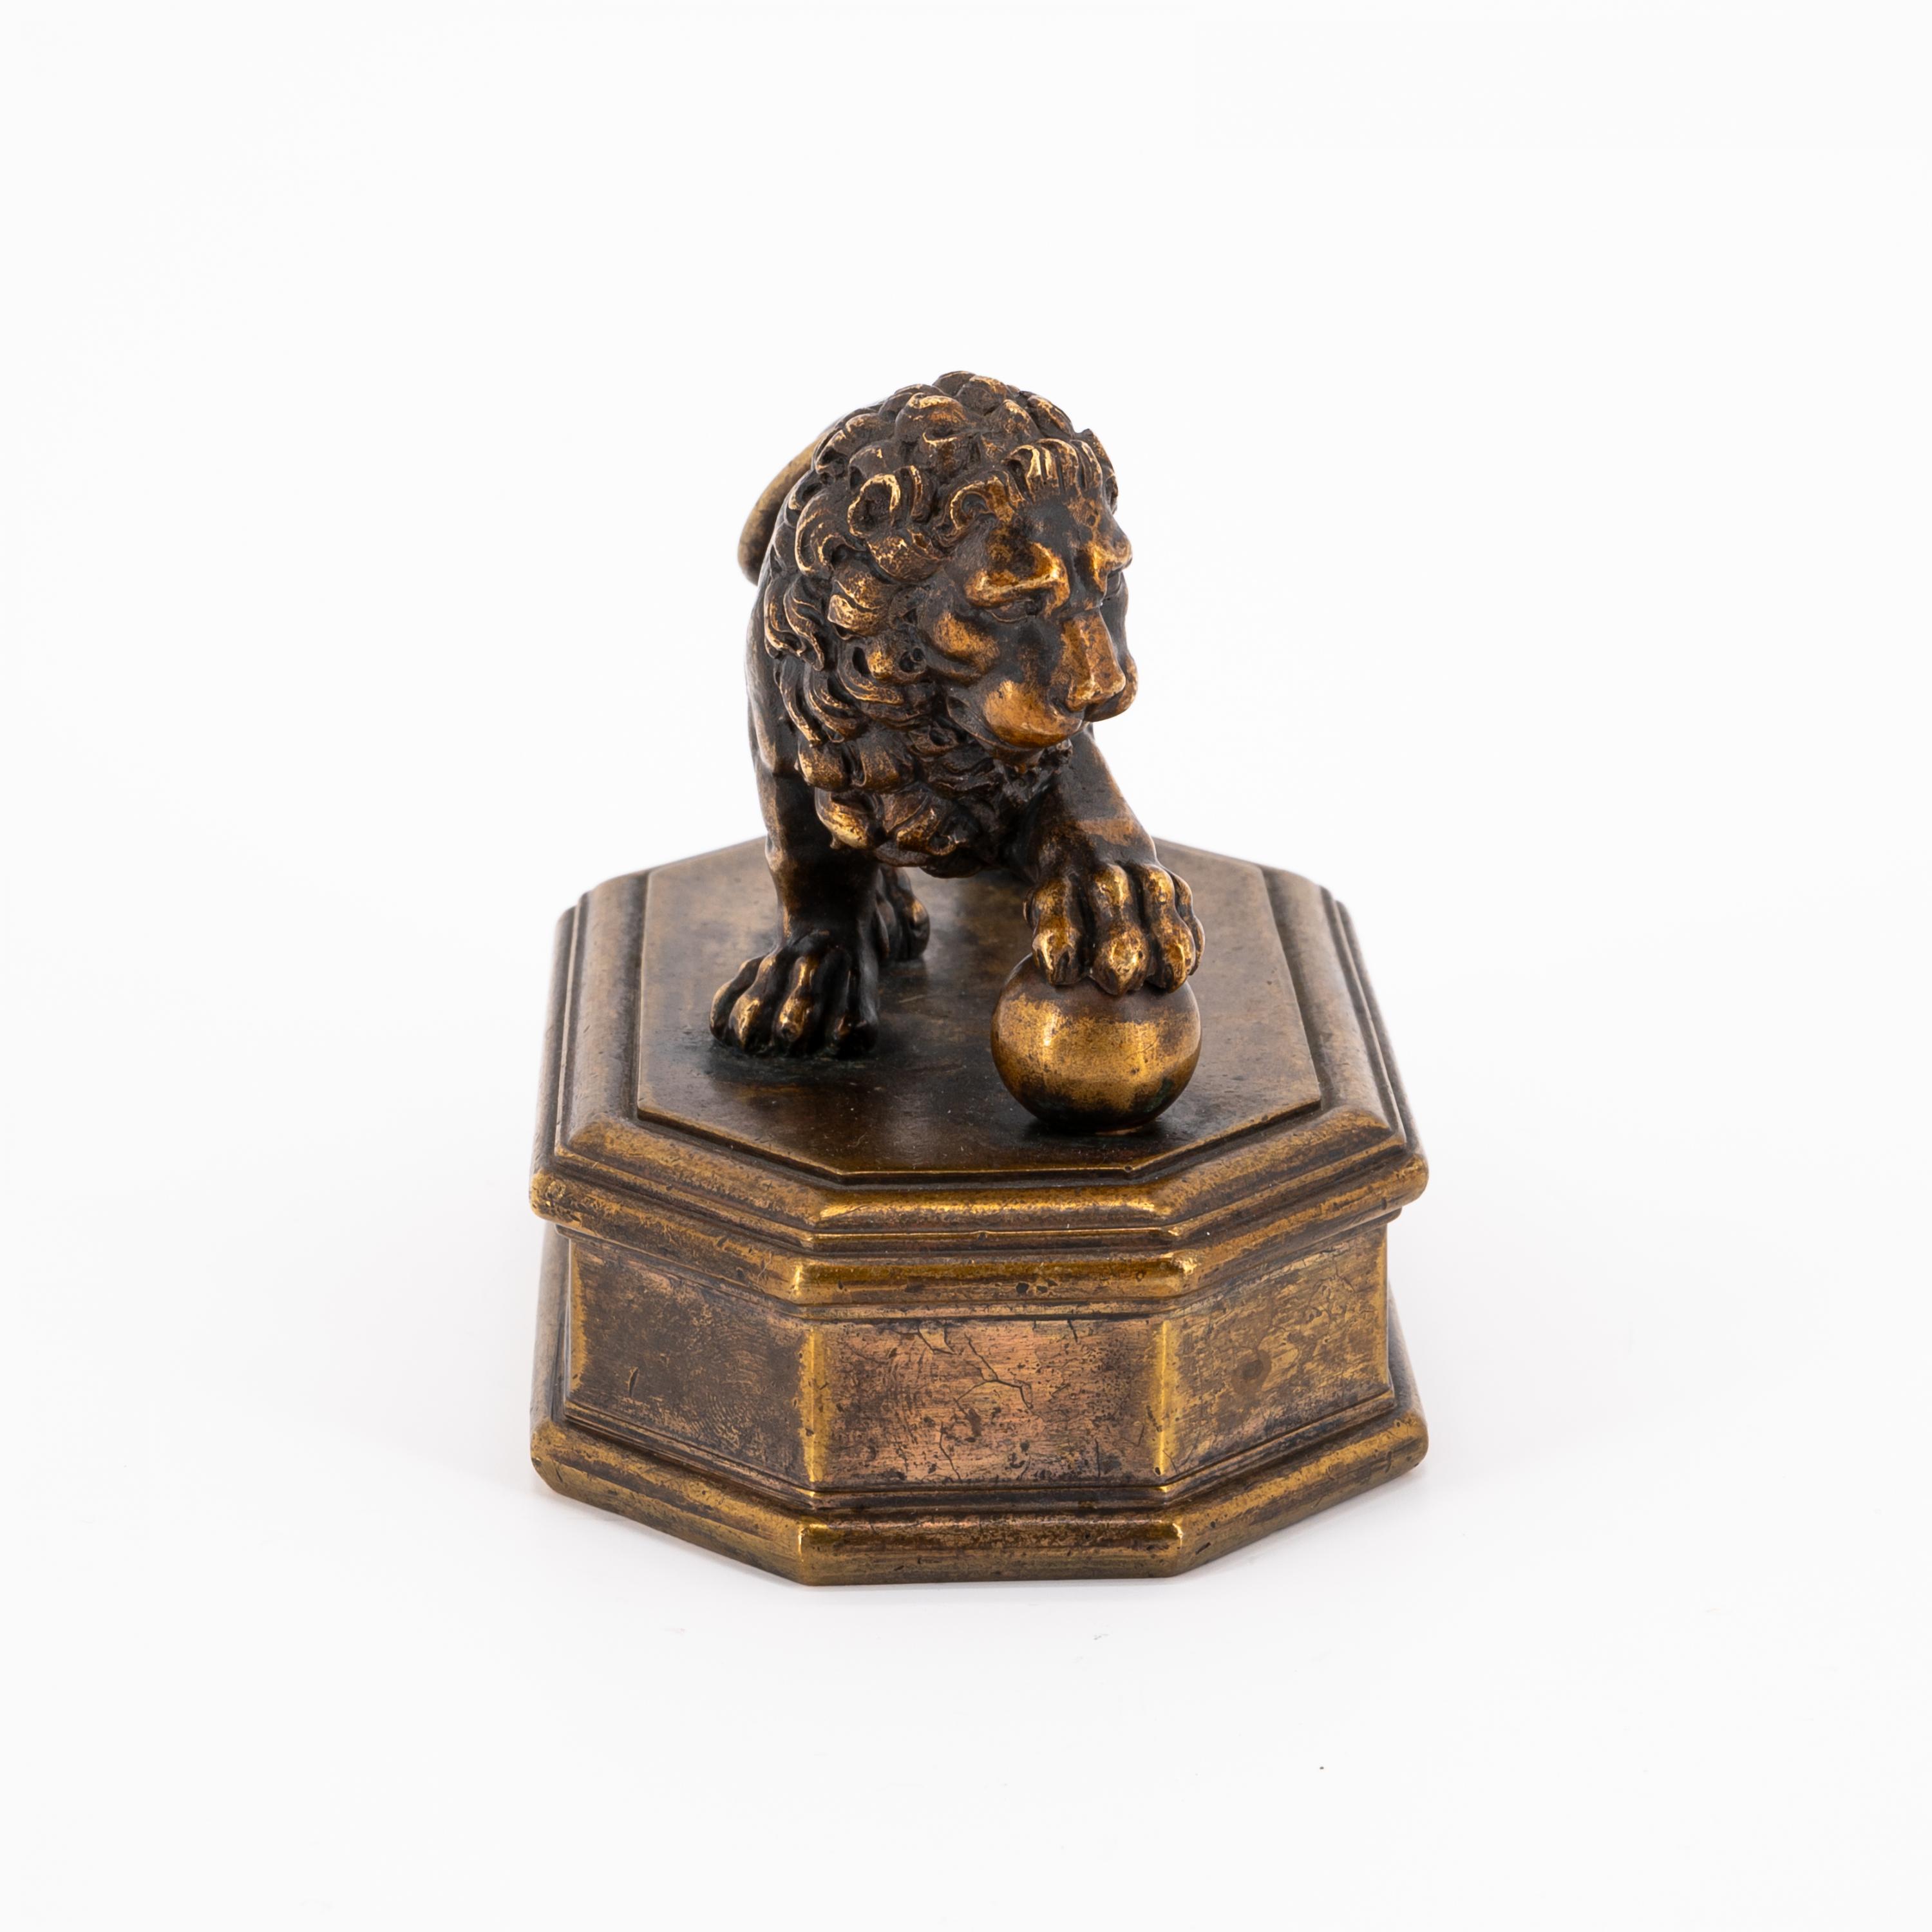 SMALL BRONZE SCULPTURE OF A LION ON A PEDESTAL - Image 5 of 6